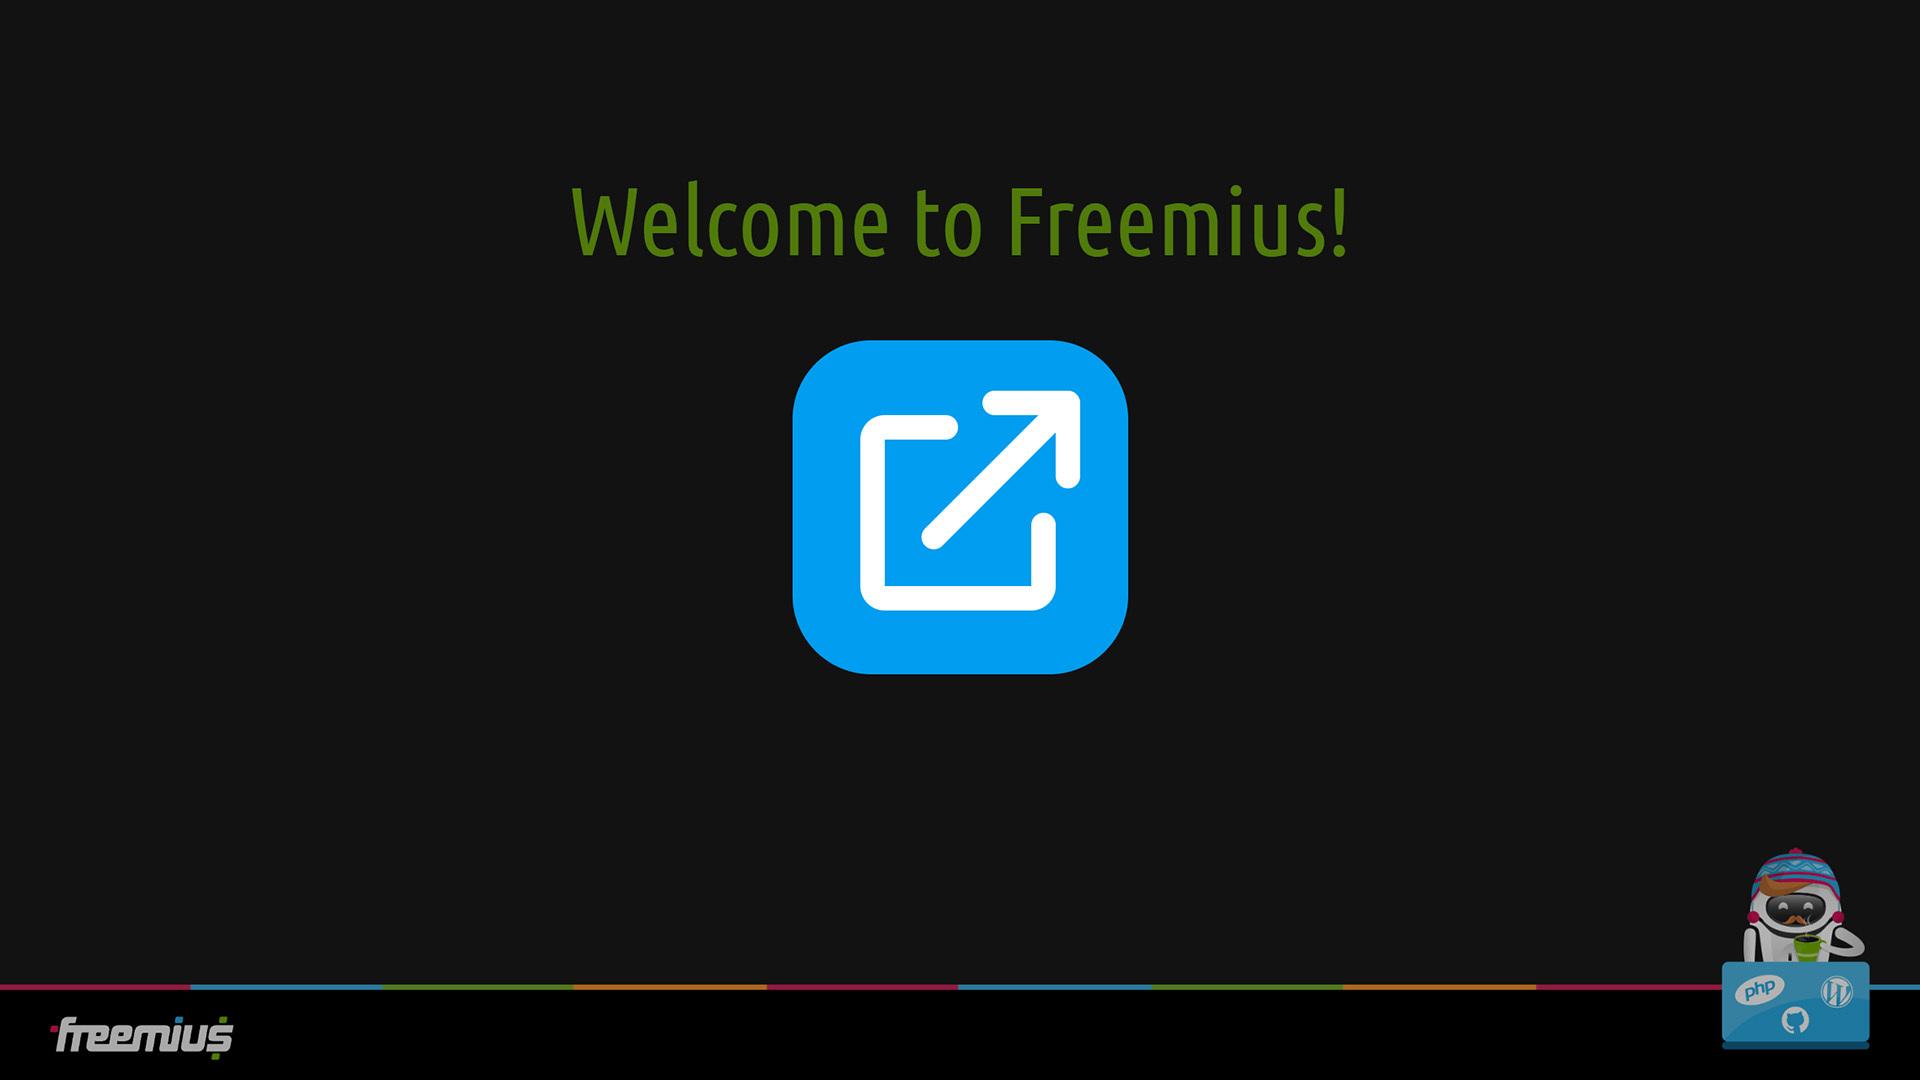 Welcome to Freemius presentation during onboarding